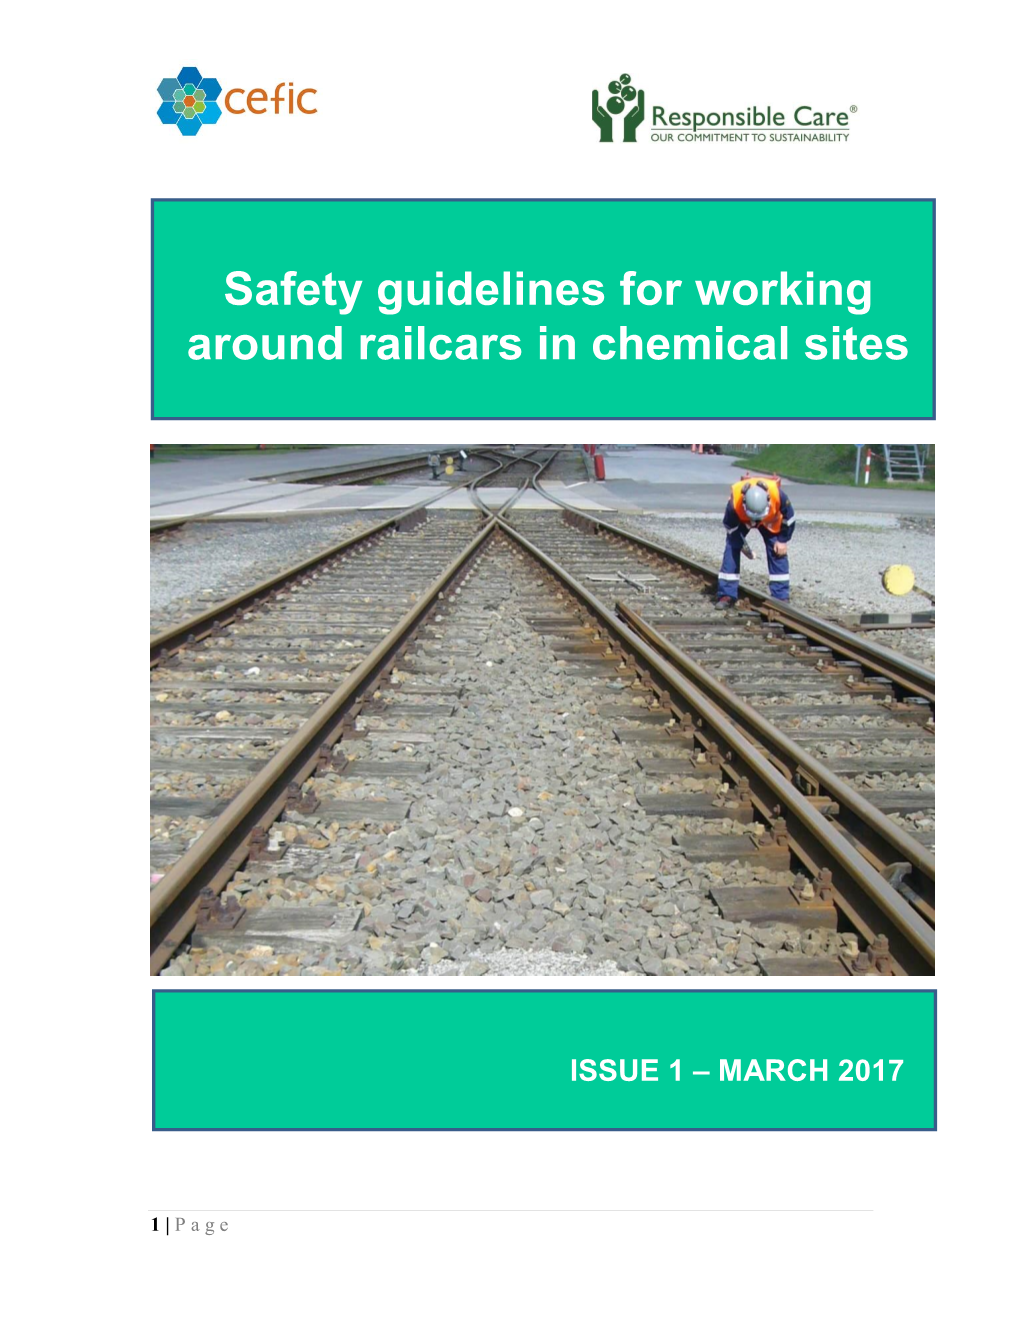 Safety Guidelines for Working Around Railcars in Chemical Sites